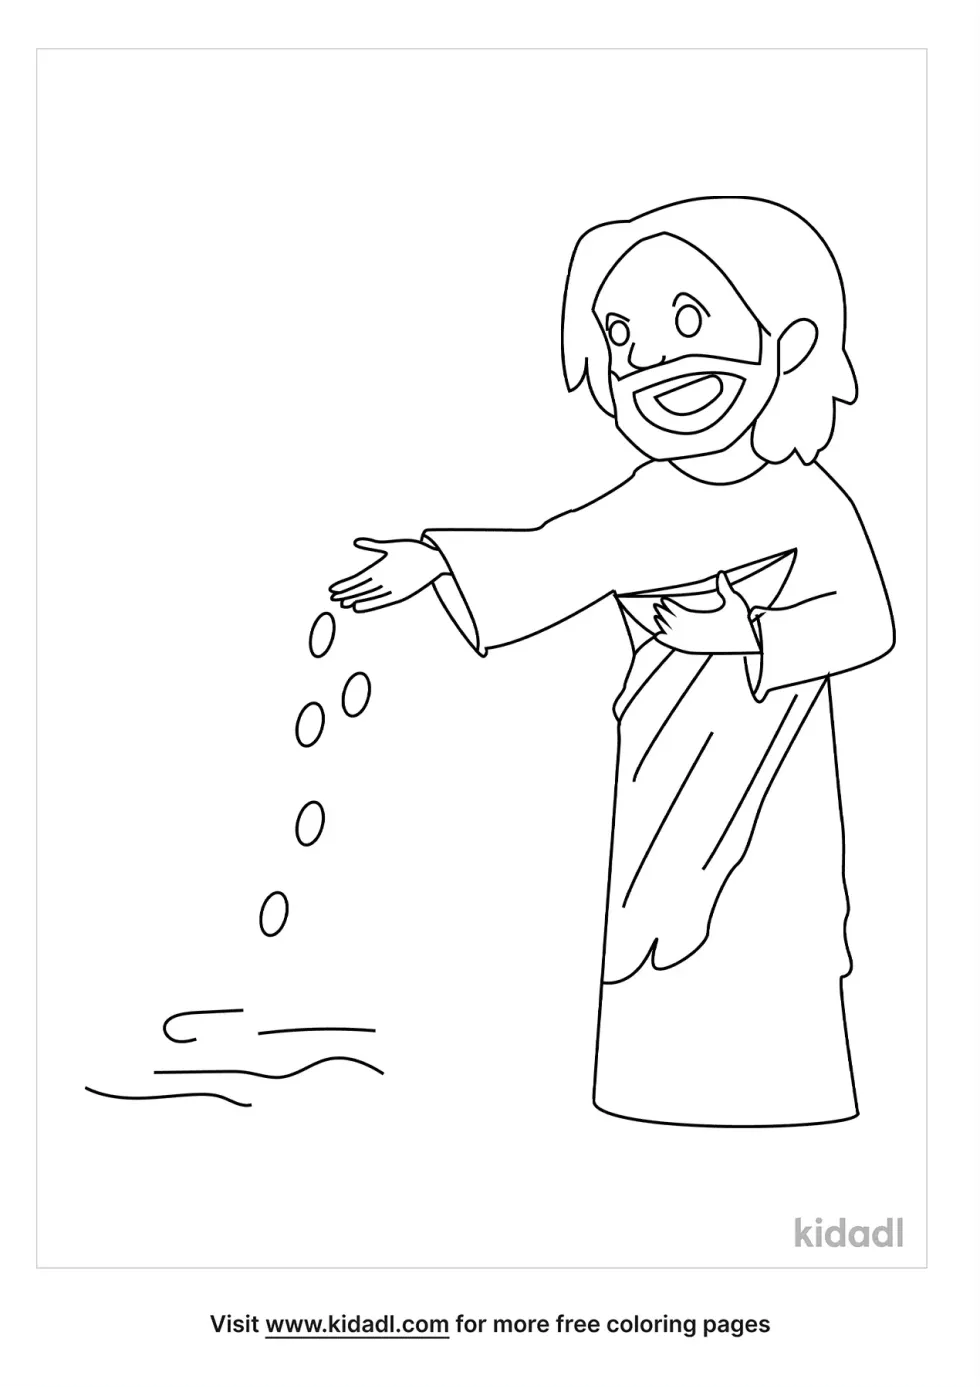 Sower Sows A Seed Coloring Page